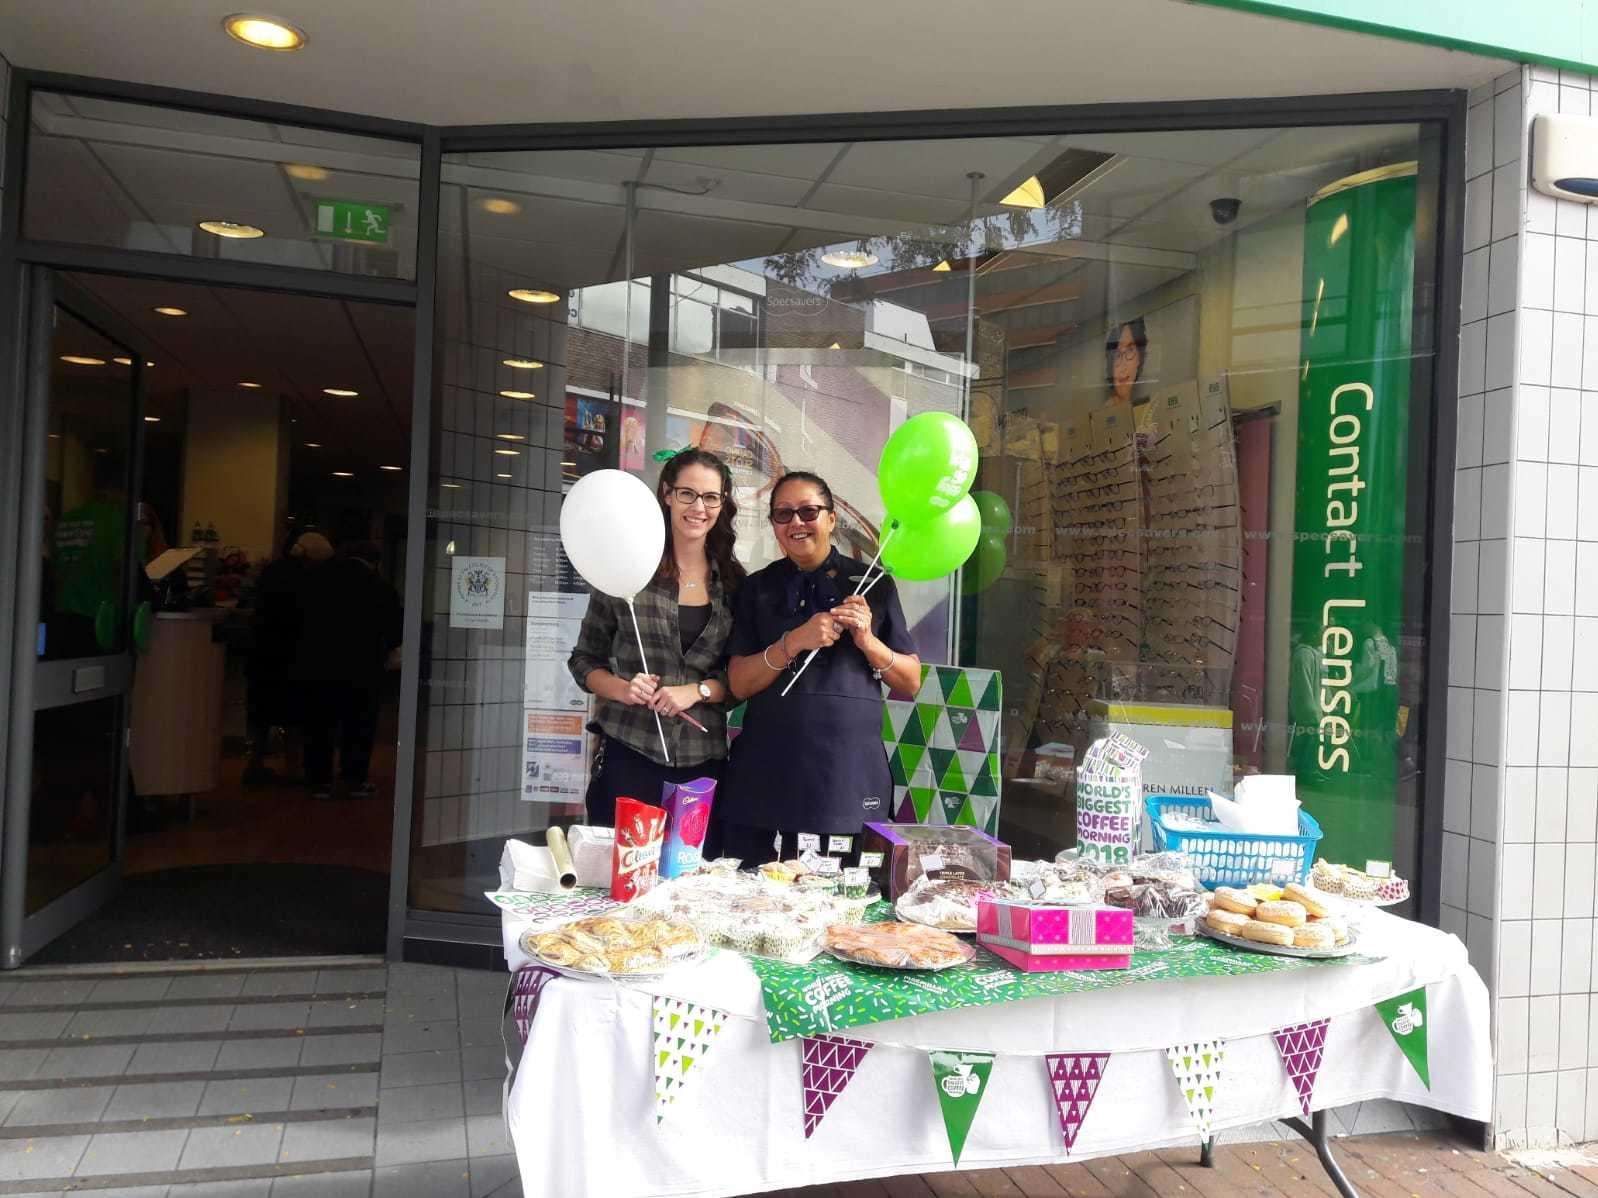 Aspiring bakers raise money for Macmillan Cancer Support as part of world's biggest coffee morning (4449787)